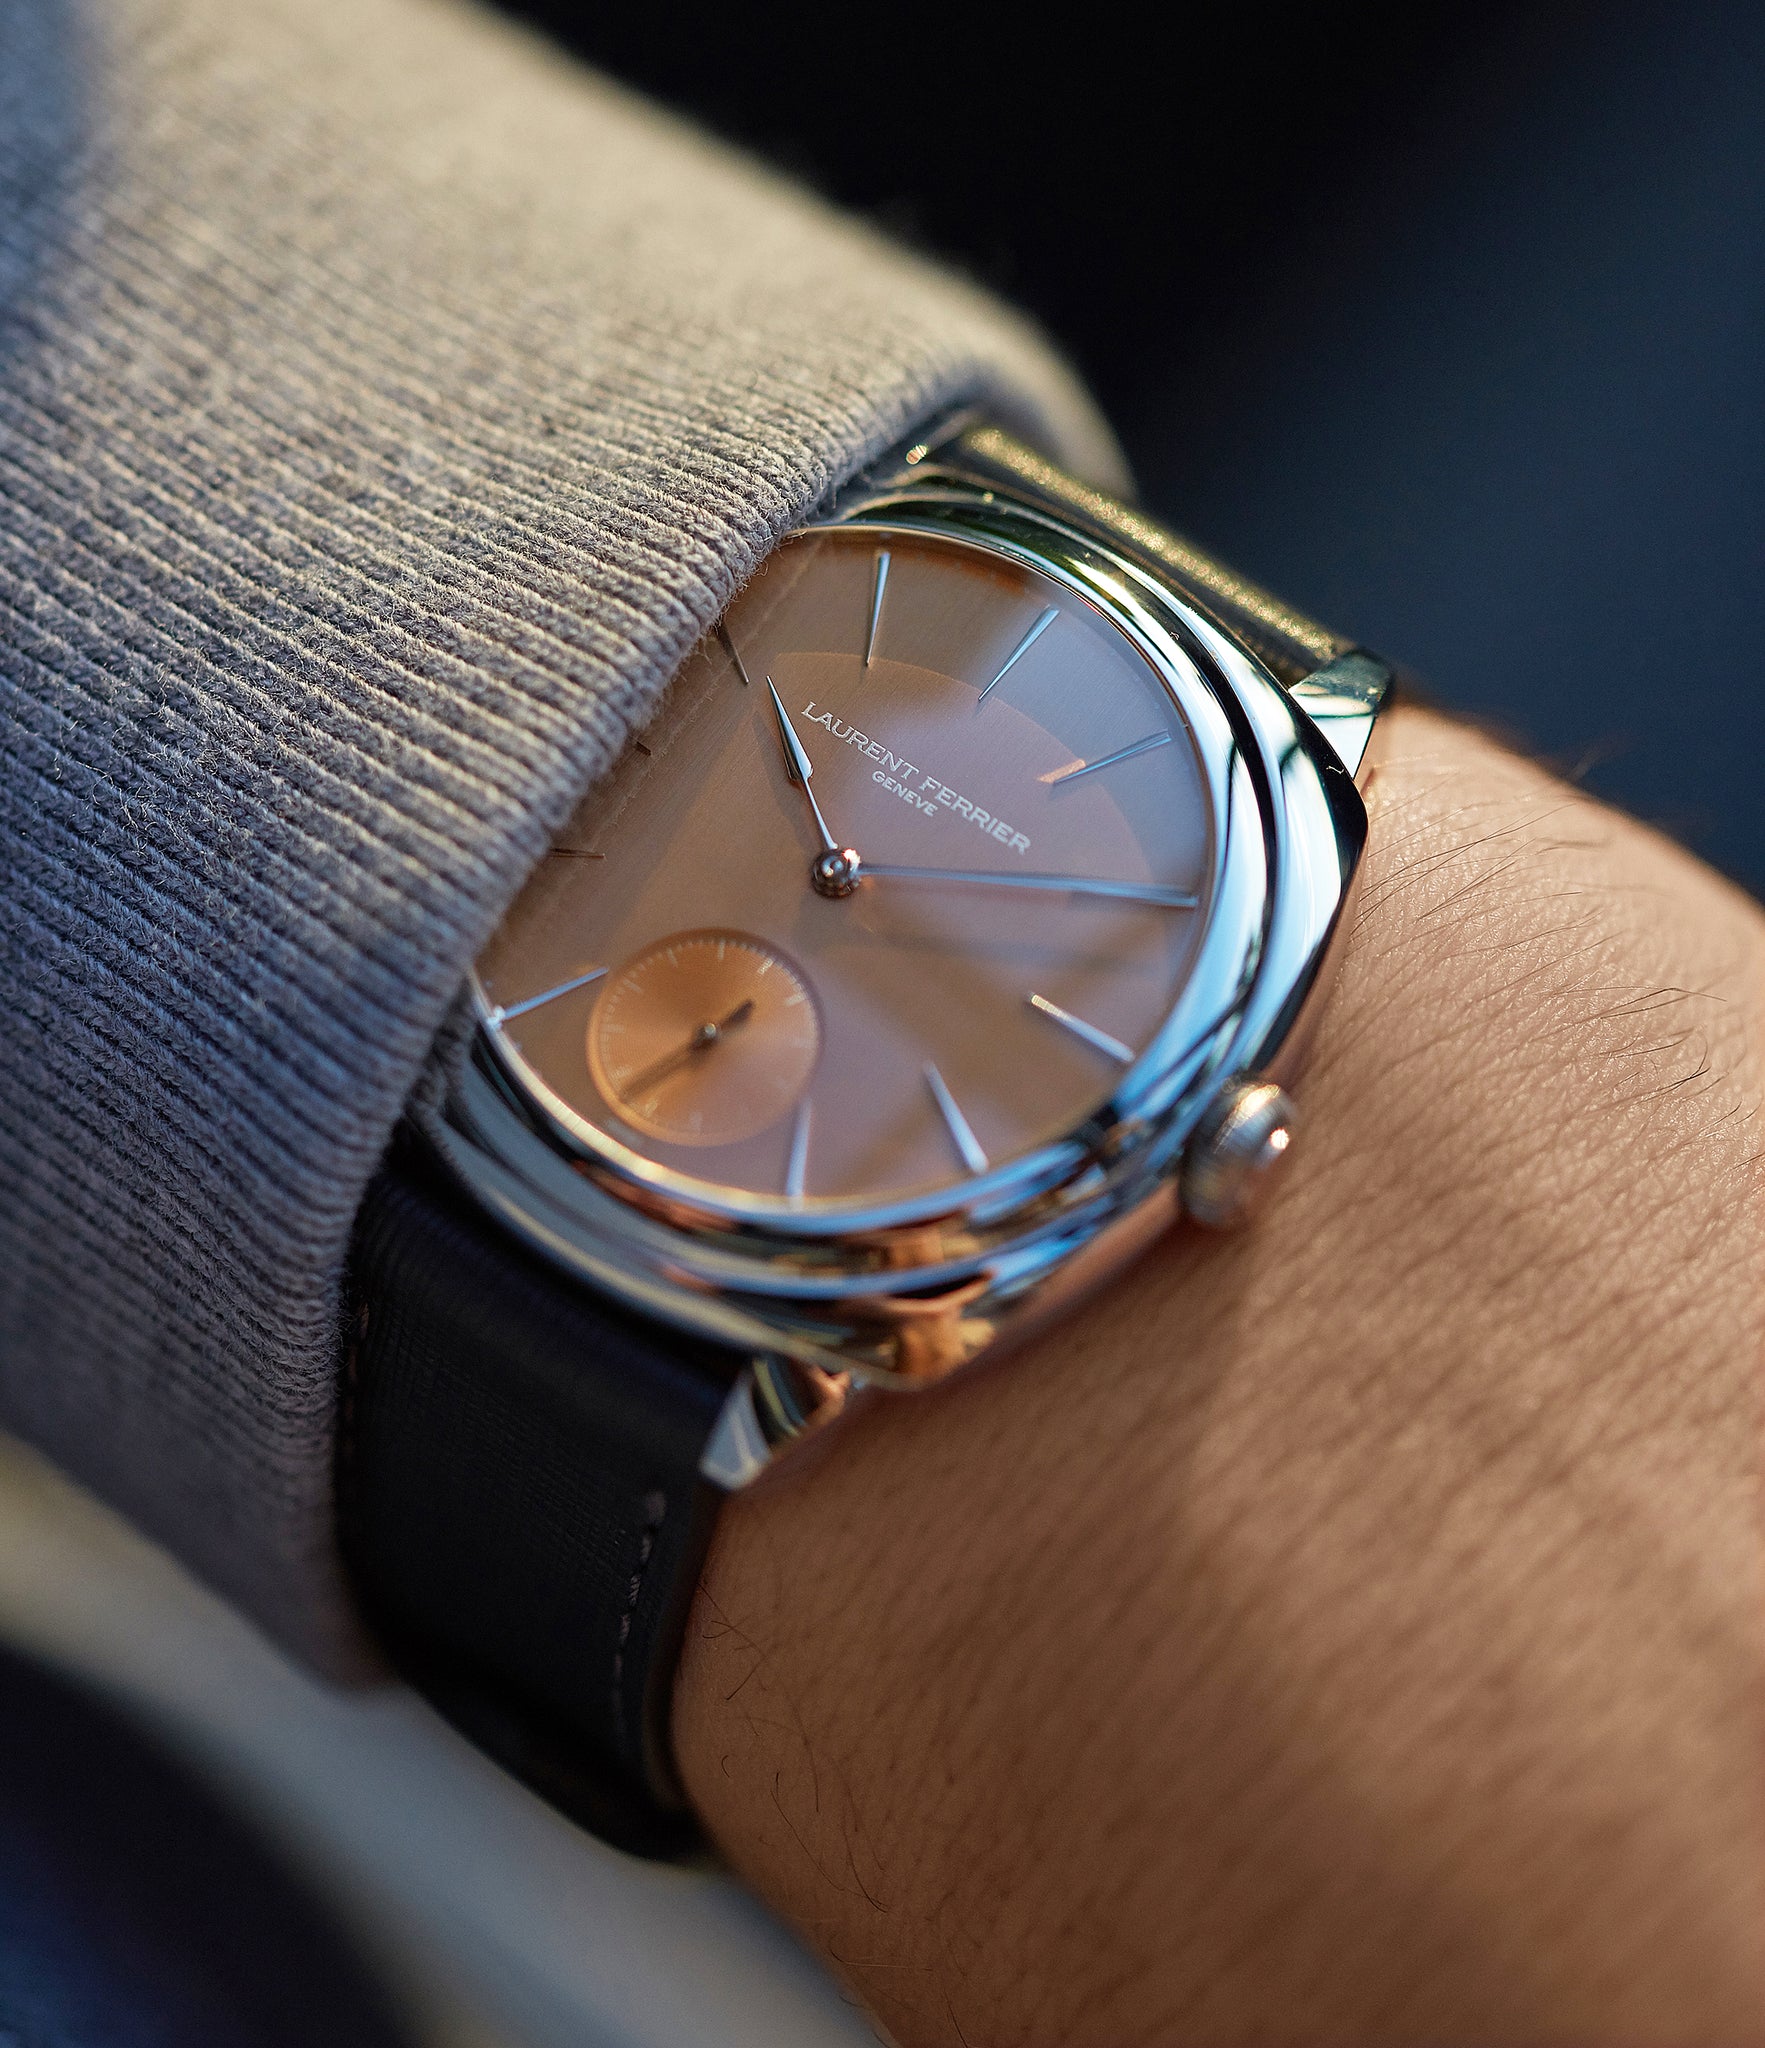 on the wrist Laurent Ferrier Galet Square Micro-rotor salmon dial steel pre-owned watch for sale online at A Collected Man London UK specialist of independent watchmakers